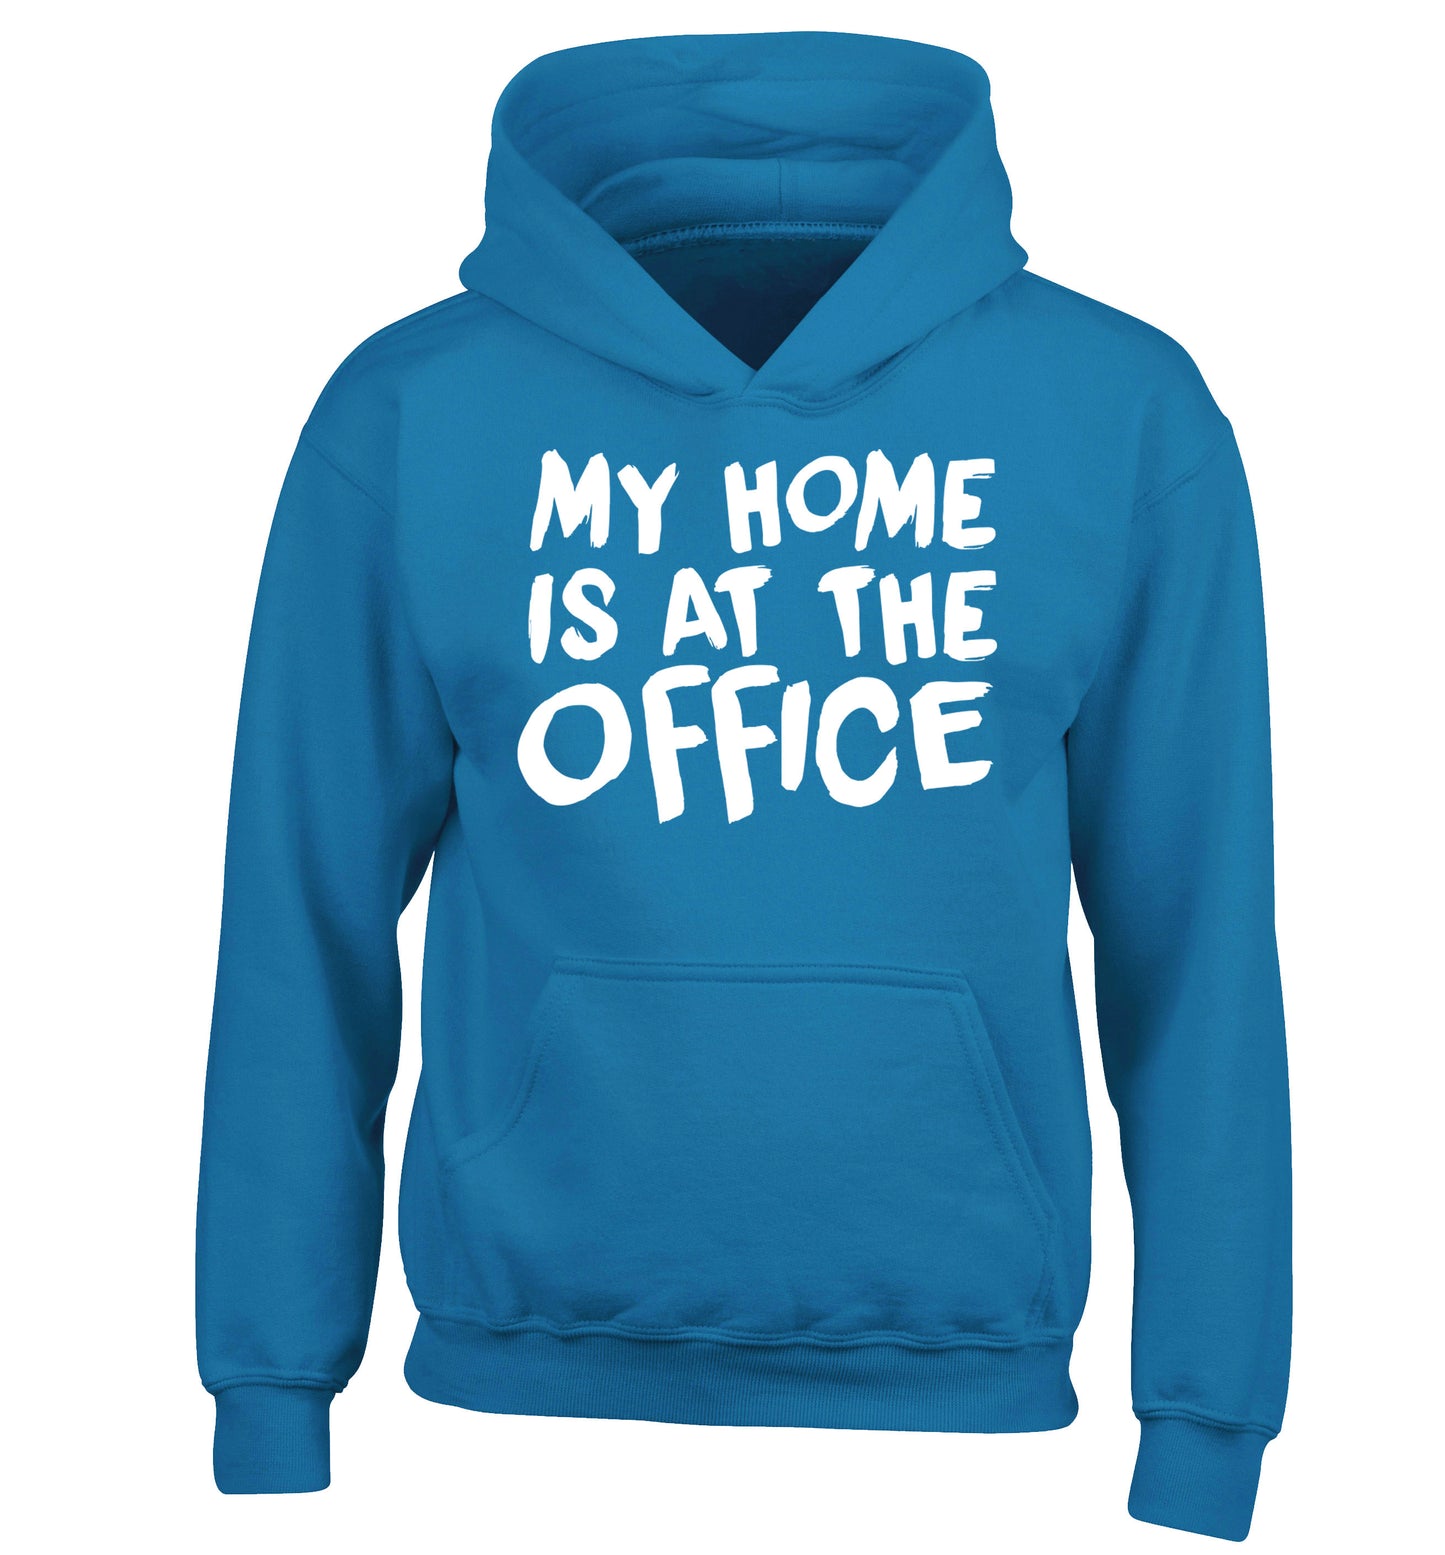 My home is at the office children's blue hoodie 12-14 Years